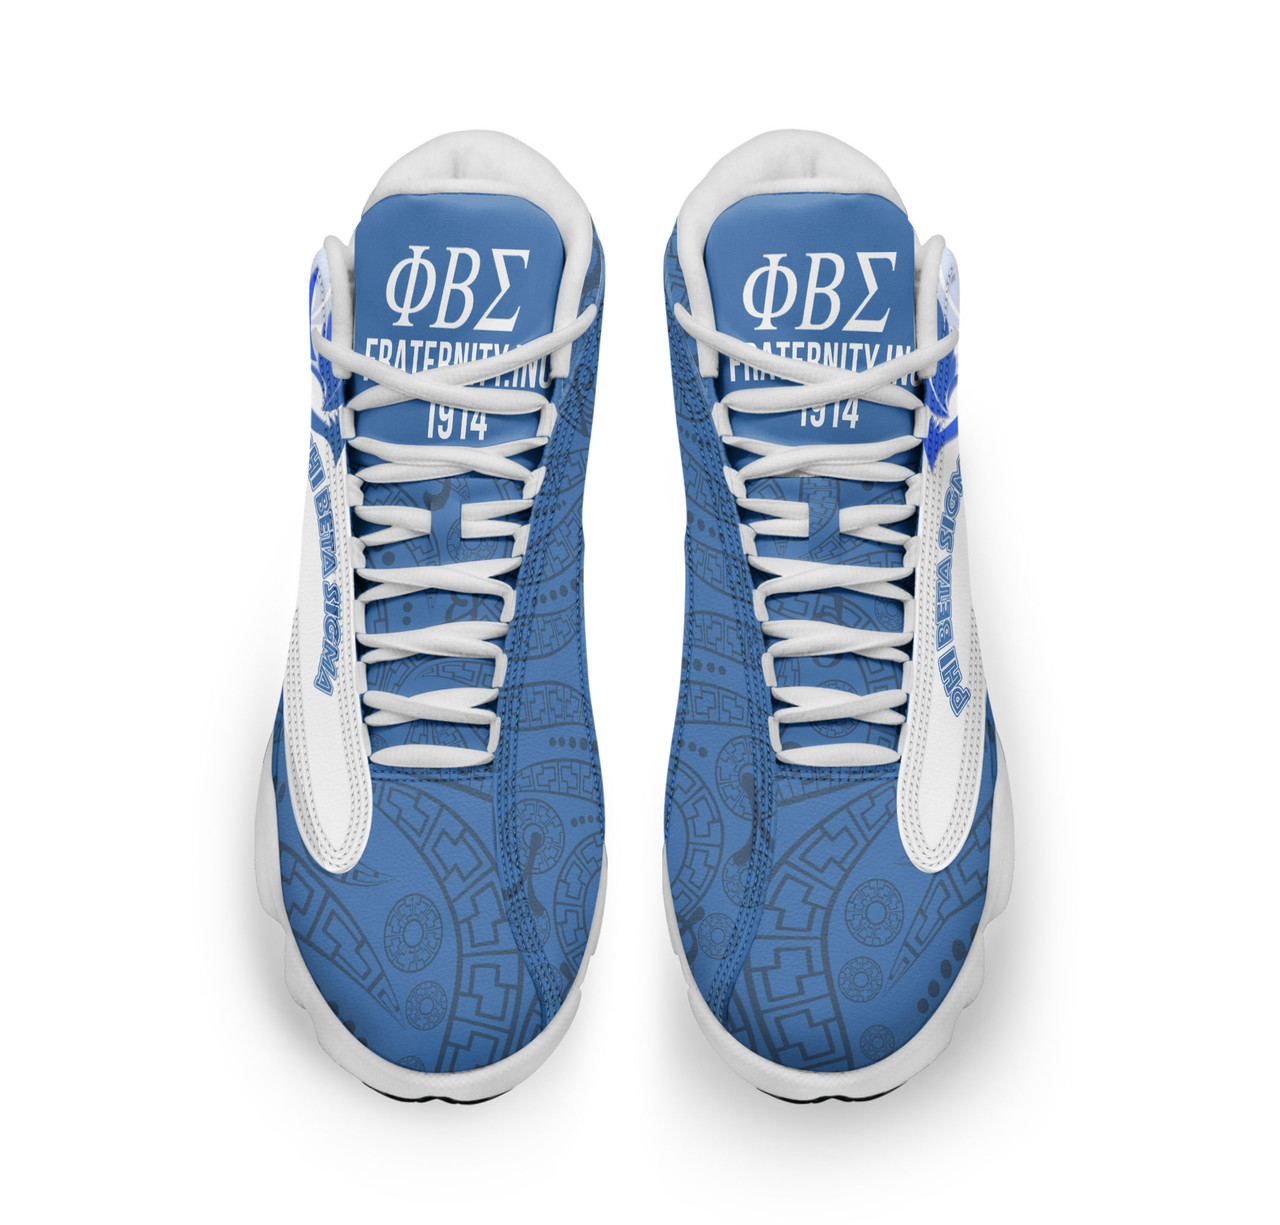 Phi Beta Sigma High Top Basketball Shoes J 13 - Fraternity Ornamental Floral Greek Alphabets High Top Sneakers J 13